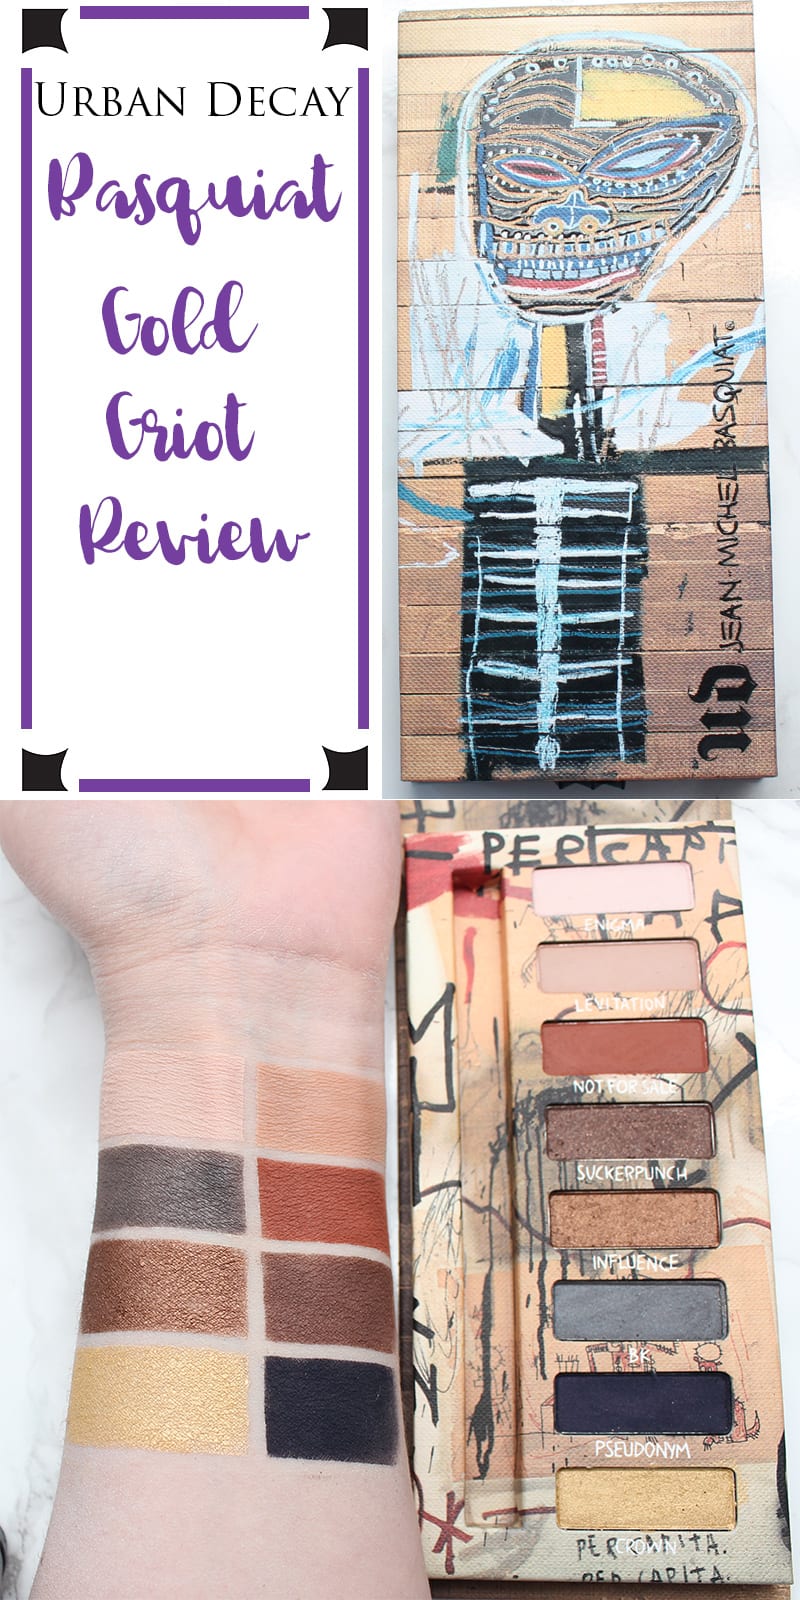 Urban Decay Gold Griot Palette Review and Swatches on Pale Skin. This is a great staple neutral palette with a good mix of mattes and shimmer.